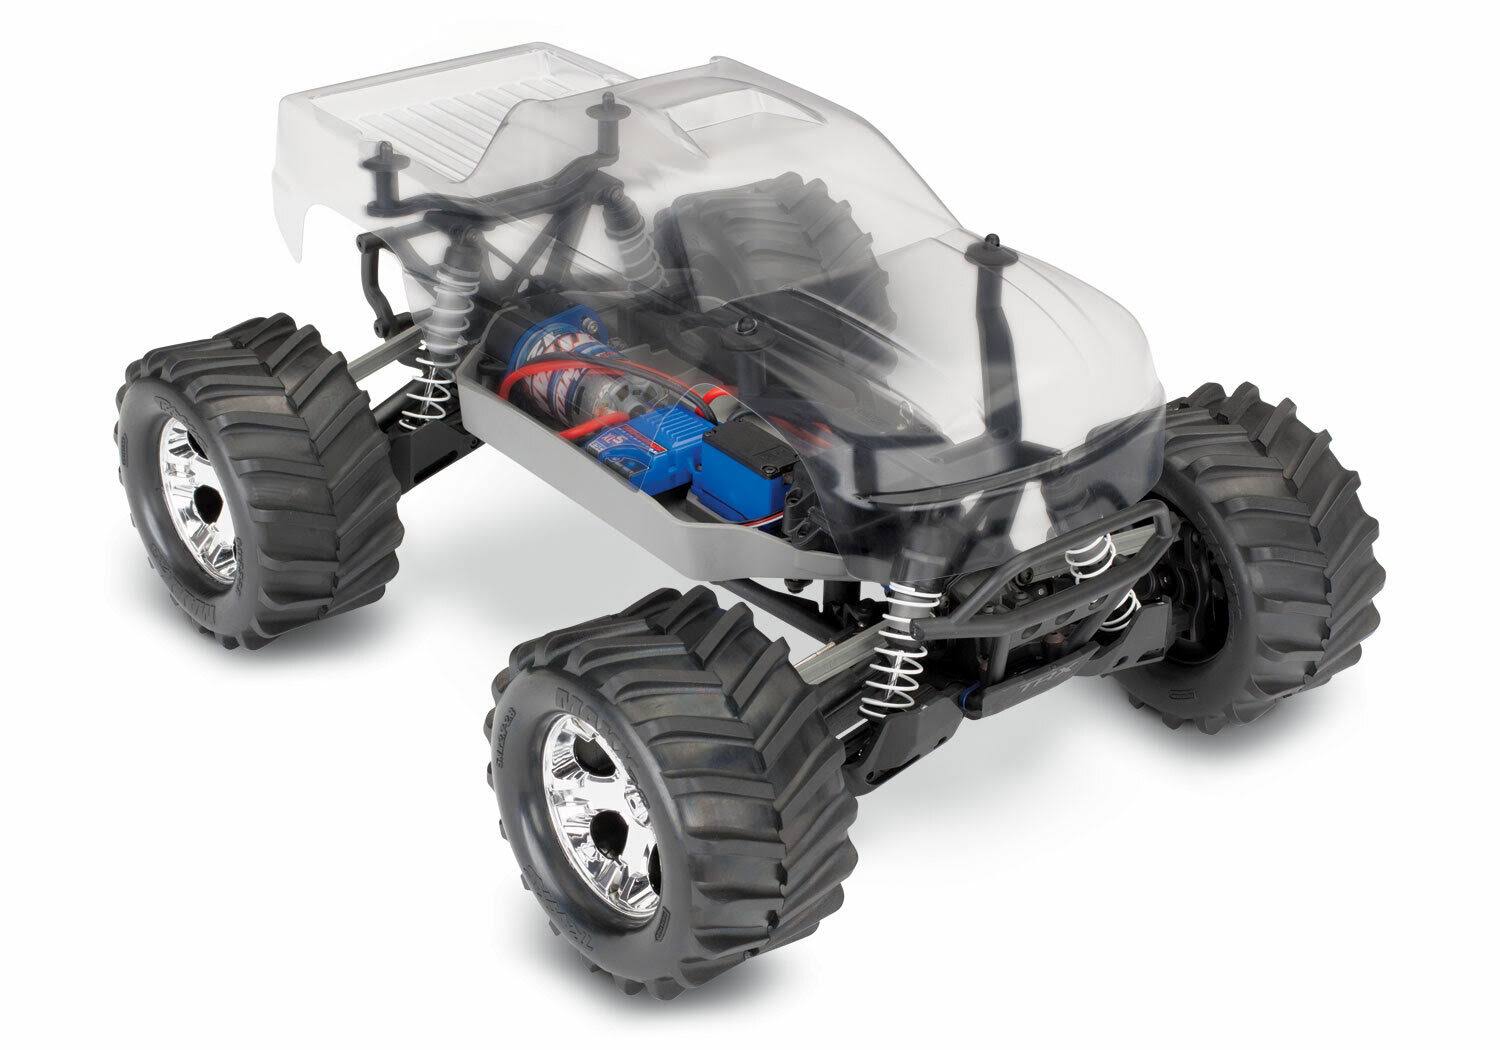 Traxxas 1/10 Stampede 4x4 4WD Monster Truck - Kit